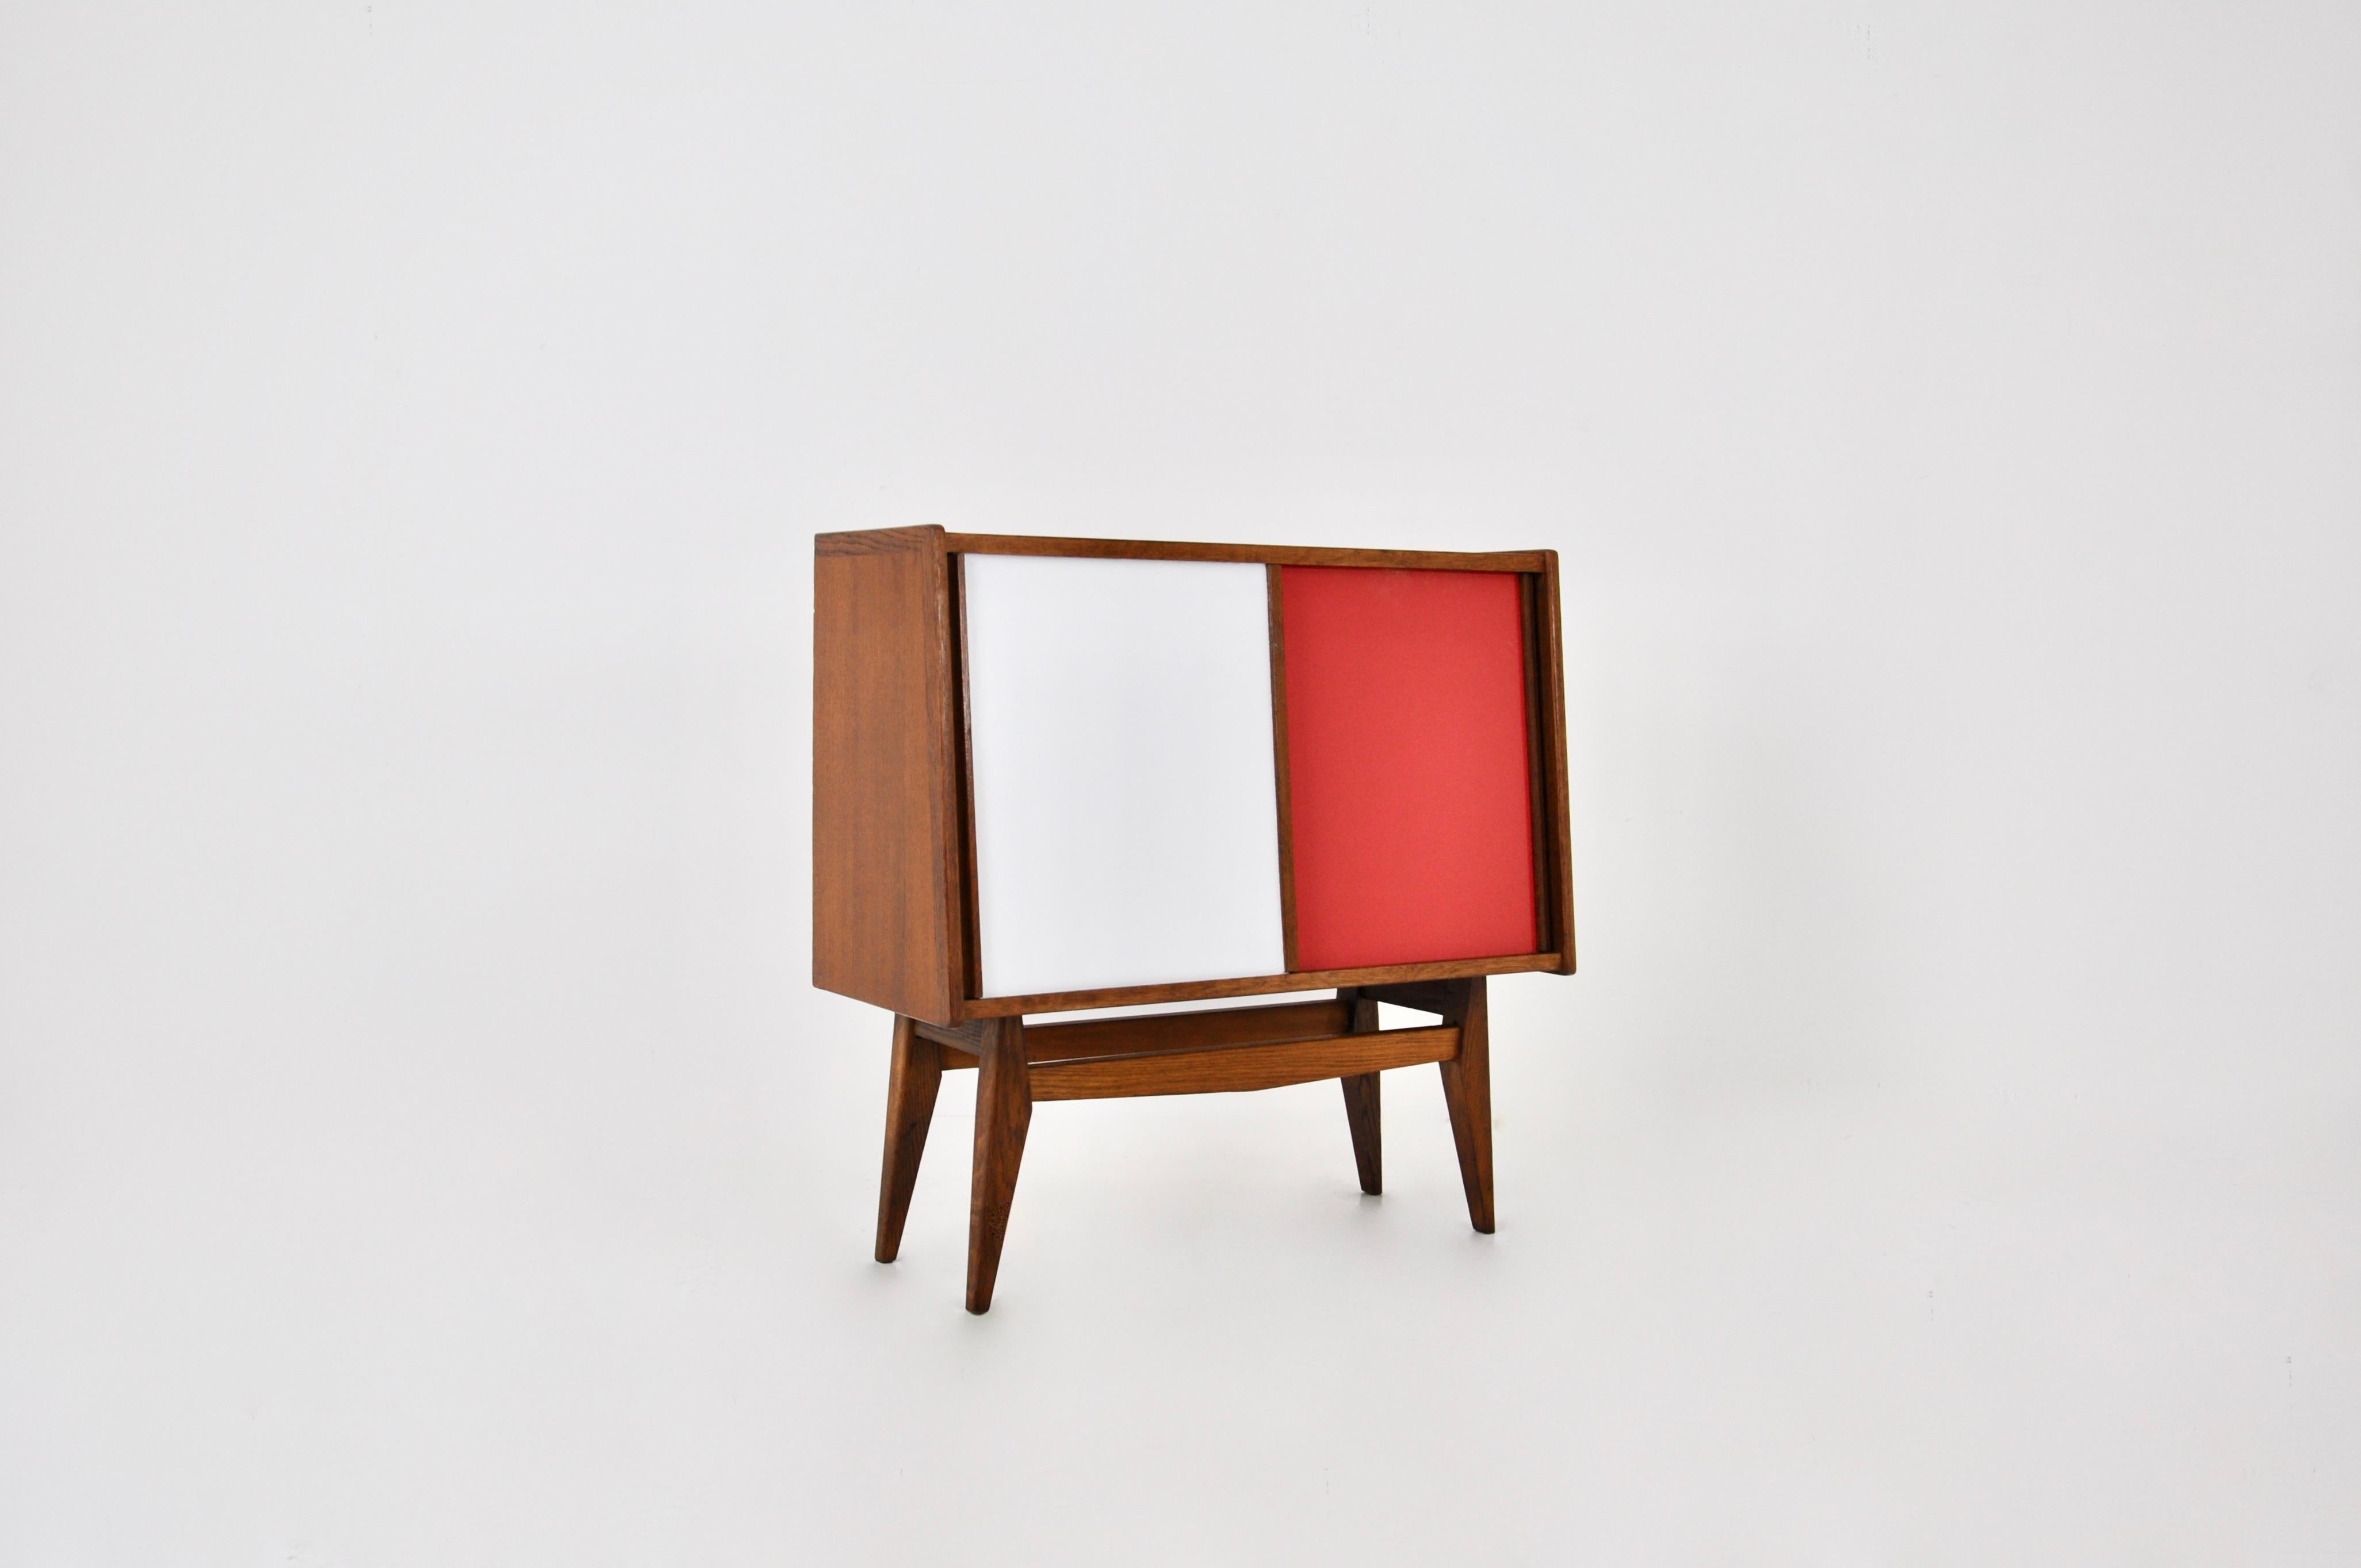 Wooden sideboard with two sliding doors in white and red. Wear due to time and age of the sideboard.